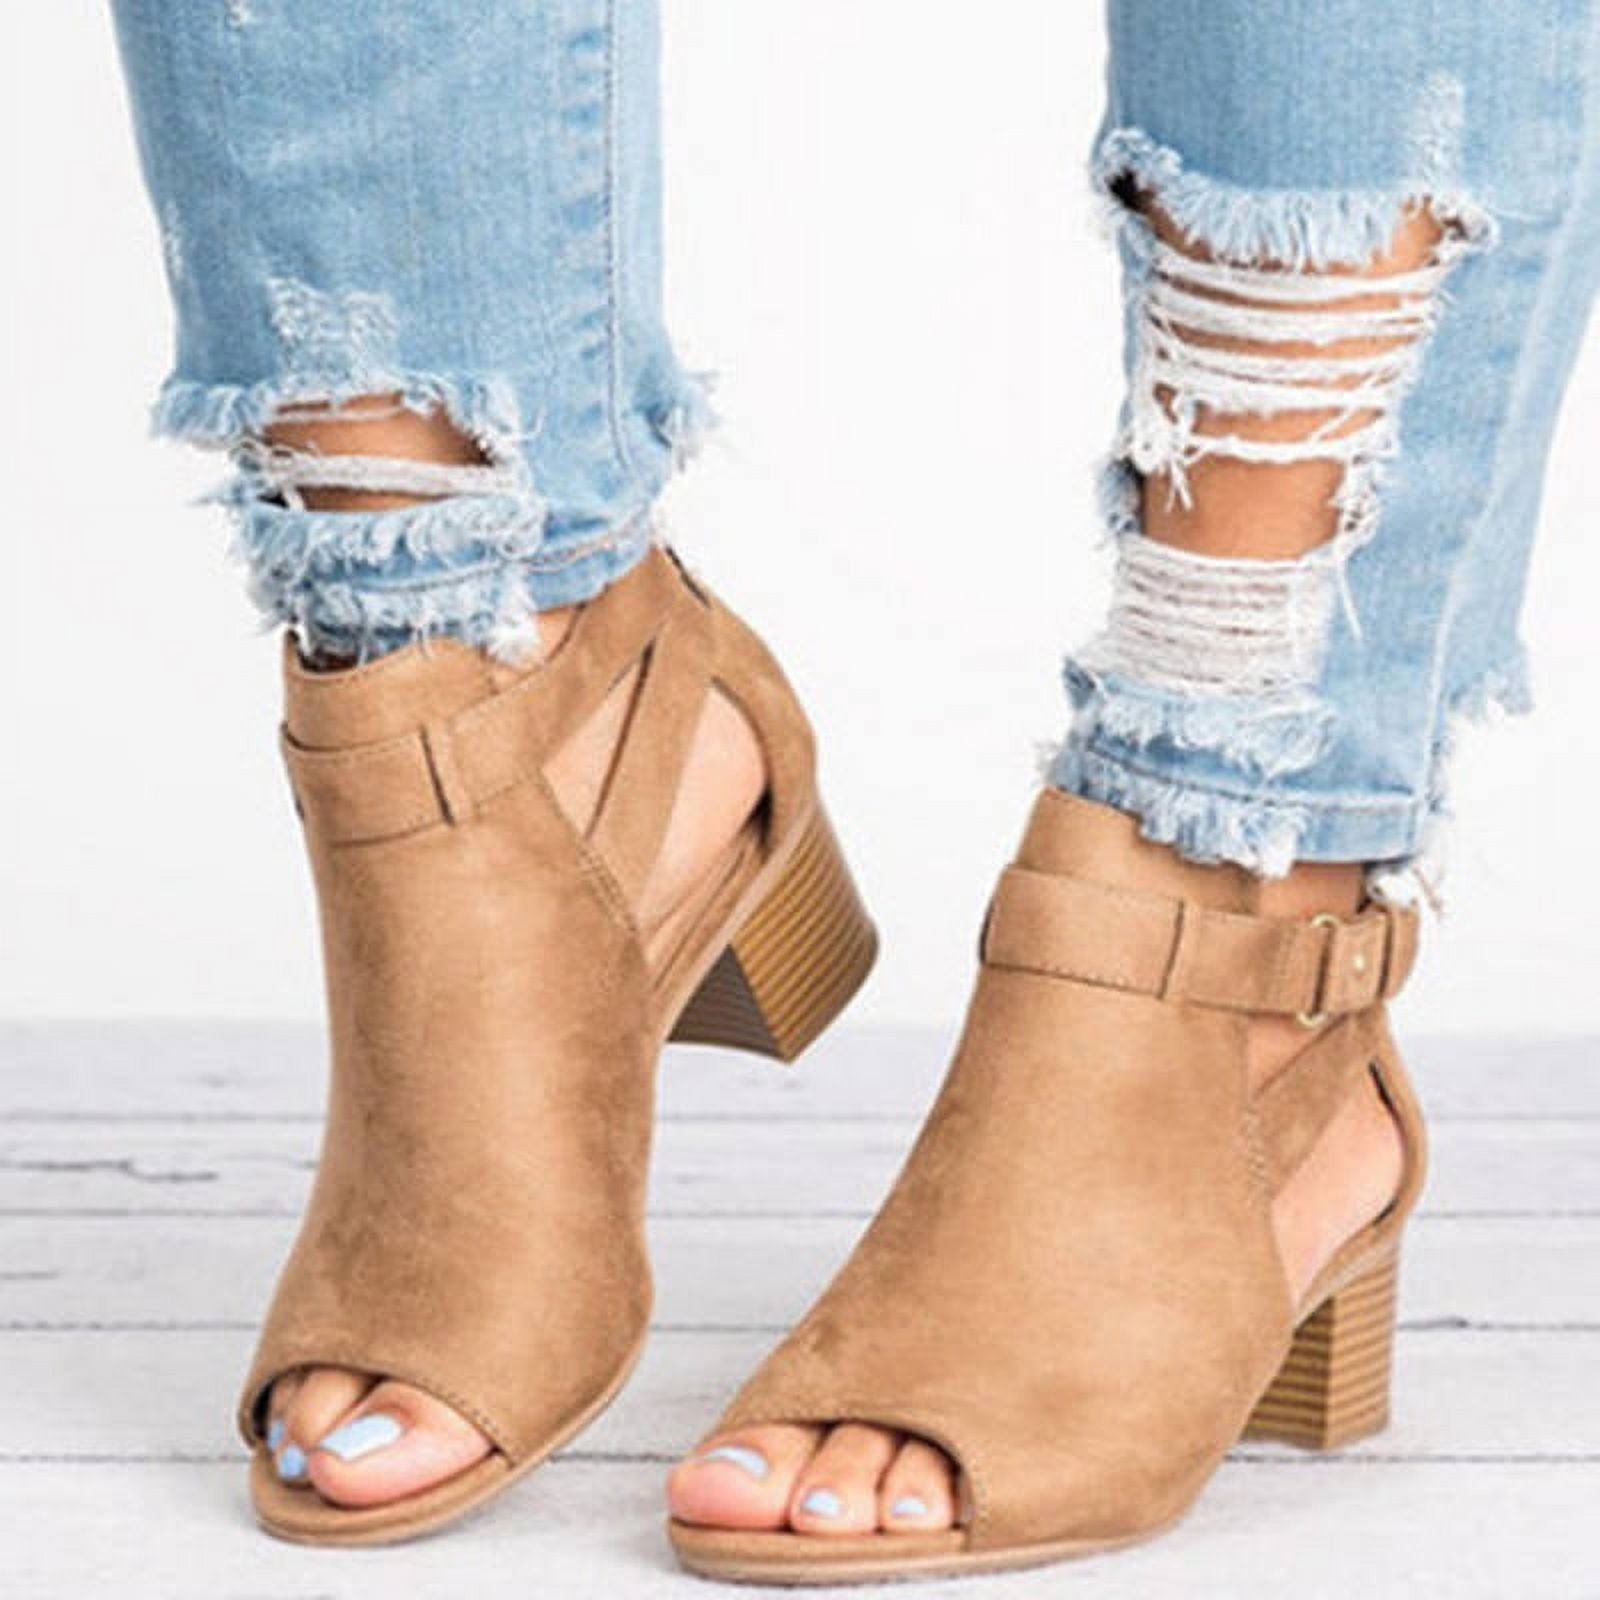 PHOTOS] Cut-Out Booties You Can Wear In The Summer Heat